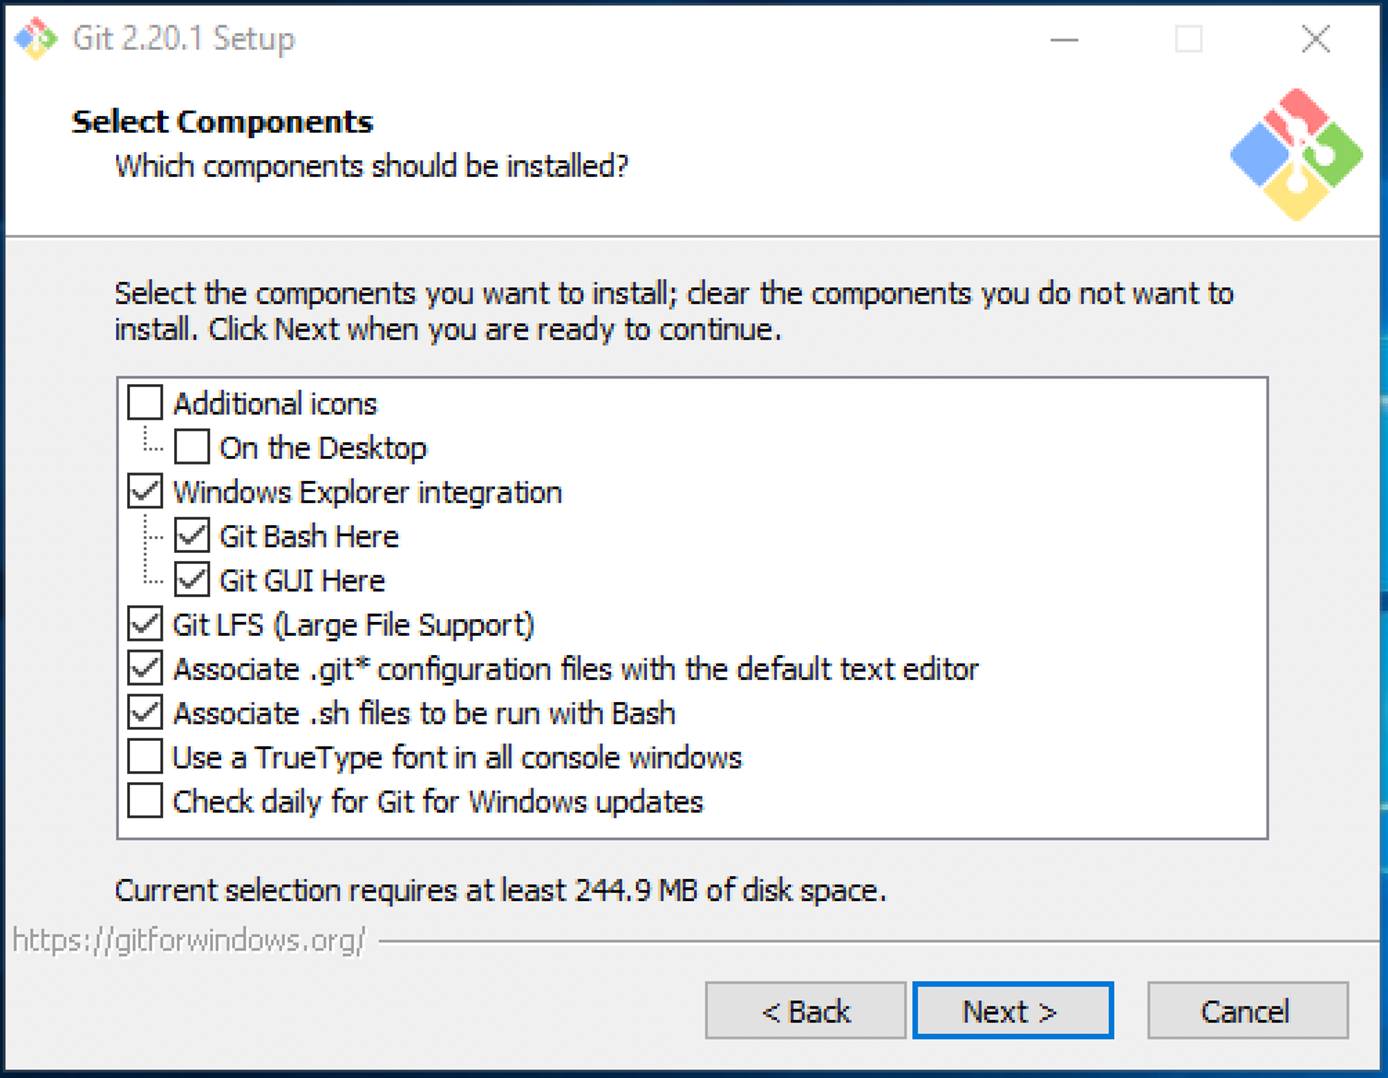 Accept the default or select additional components.